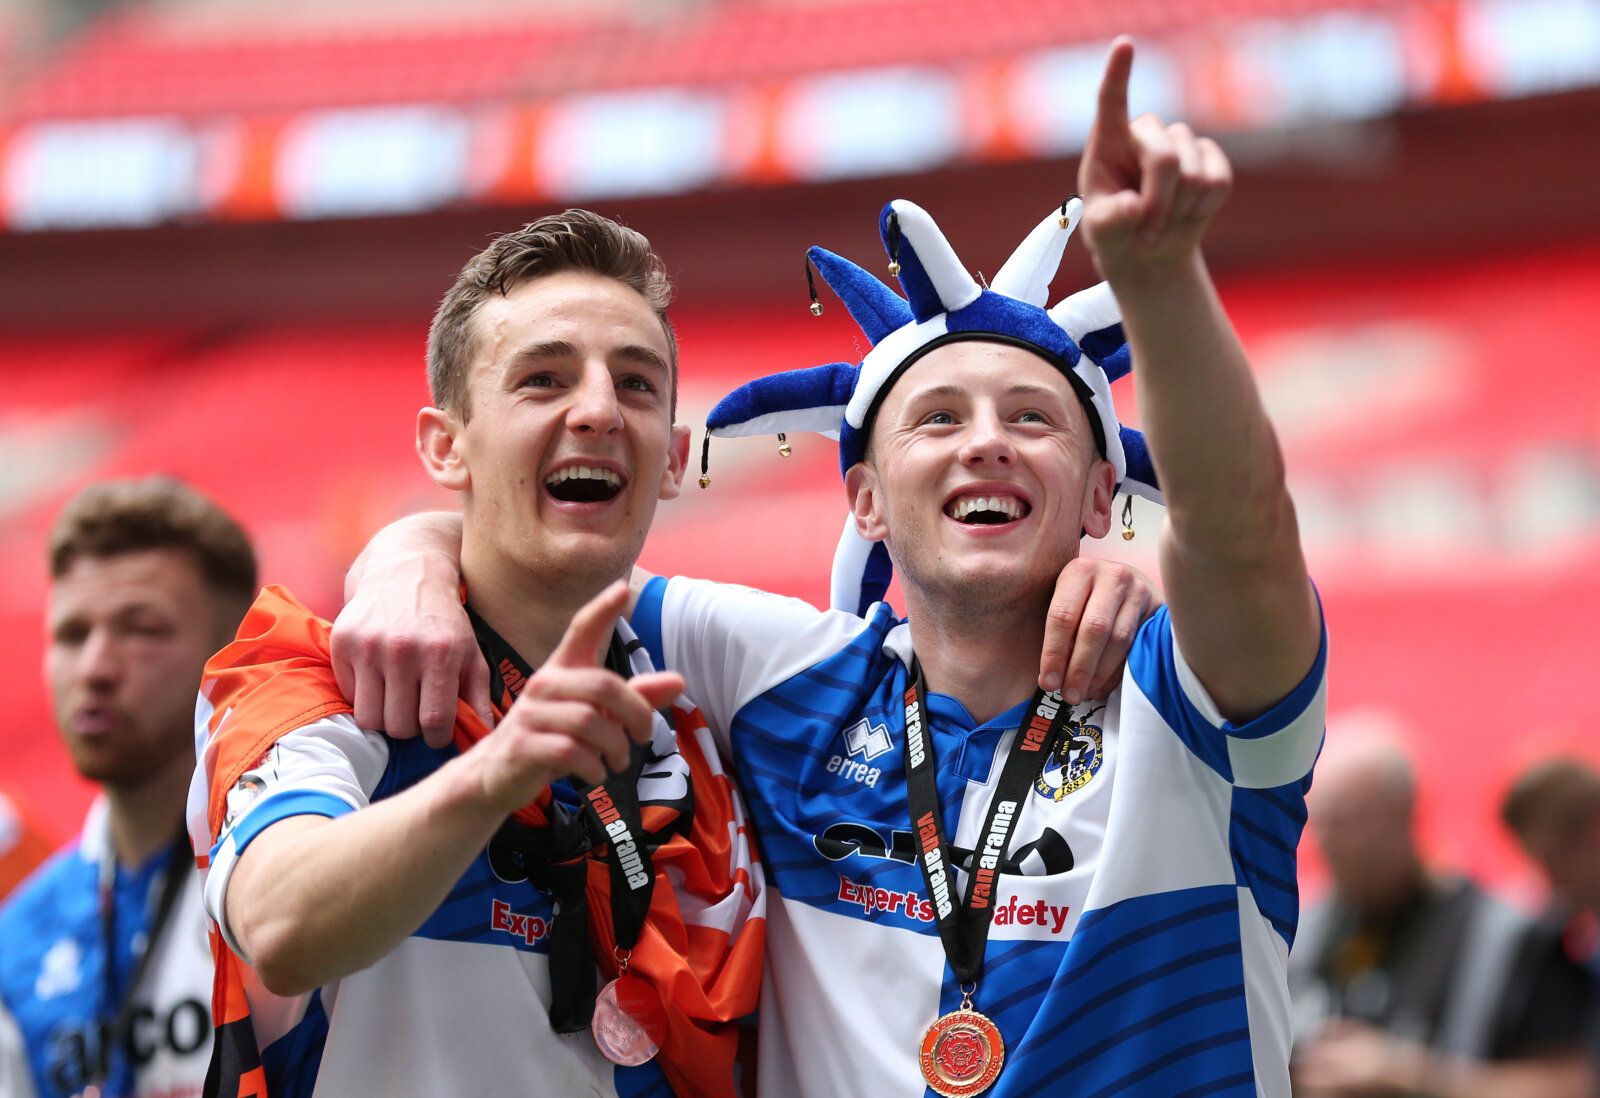 Football - Bristol Rovers v Grimsby Town - Vanarama Conference Play-Off Final - Wembley Stadium - 17/5/15 
Bristol Rovers' Tom Lockyer (L) and Ollie Clarke (R) celebrate after being promoted to Sky Bet League Two 
Mandatory Credit: Action Images / Matthew Childs 
Livepic 
EDITORIAL USE ONLY.